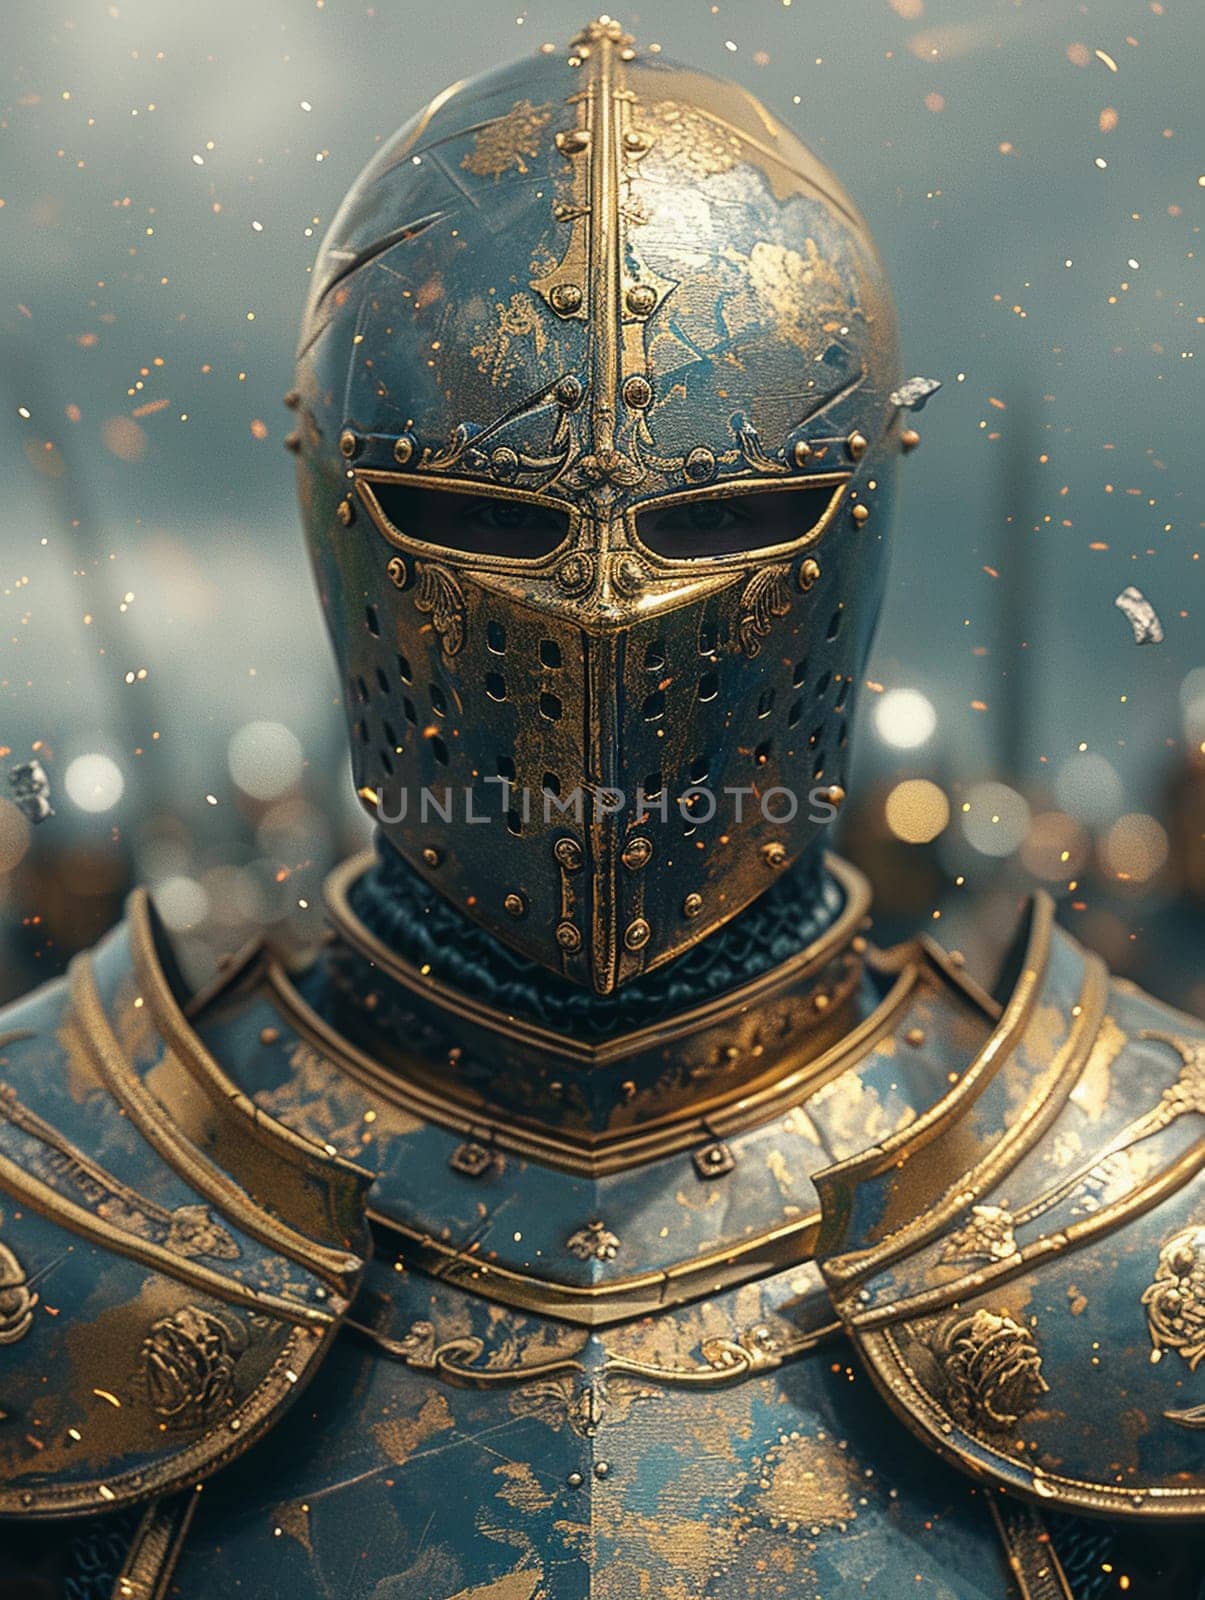 A knight's shining armor detailed in a 3D render, reflecting a tumultuous sky and a looming battle.